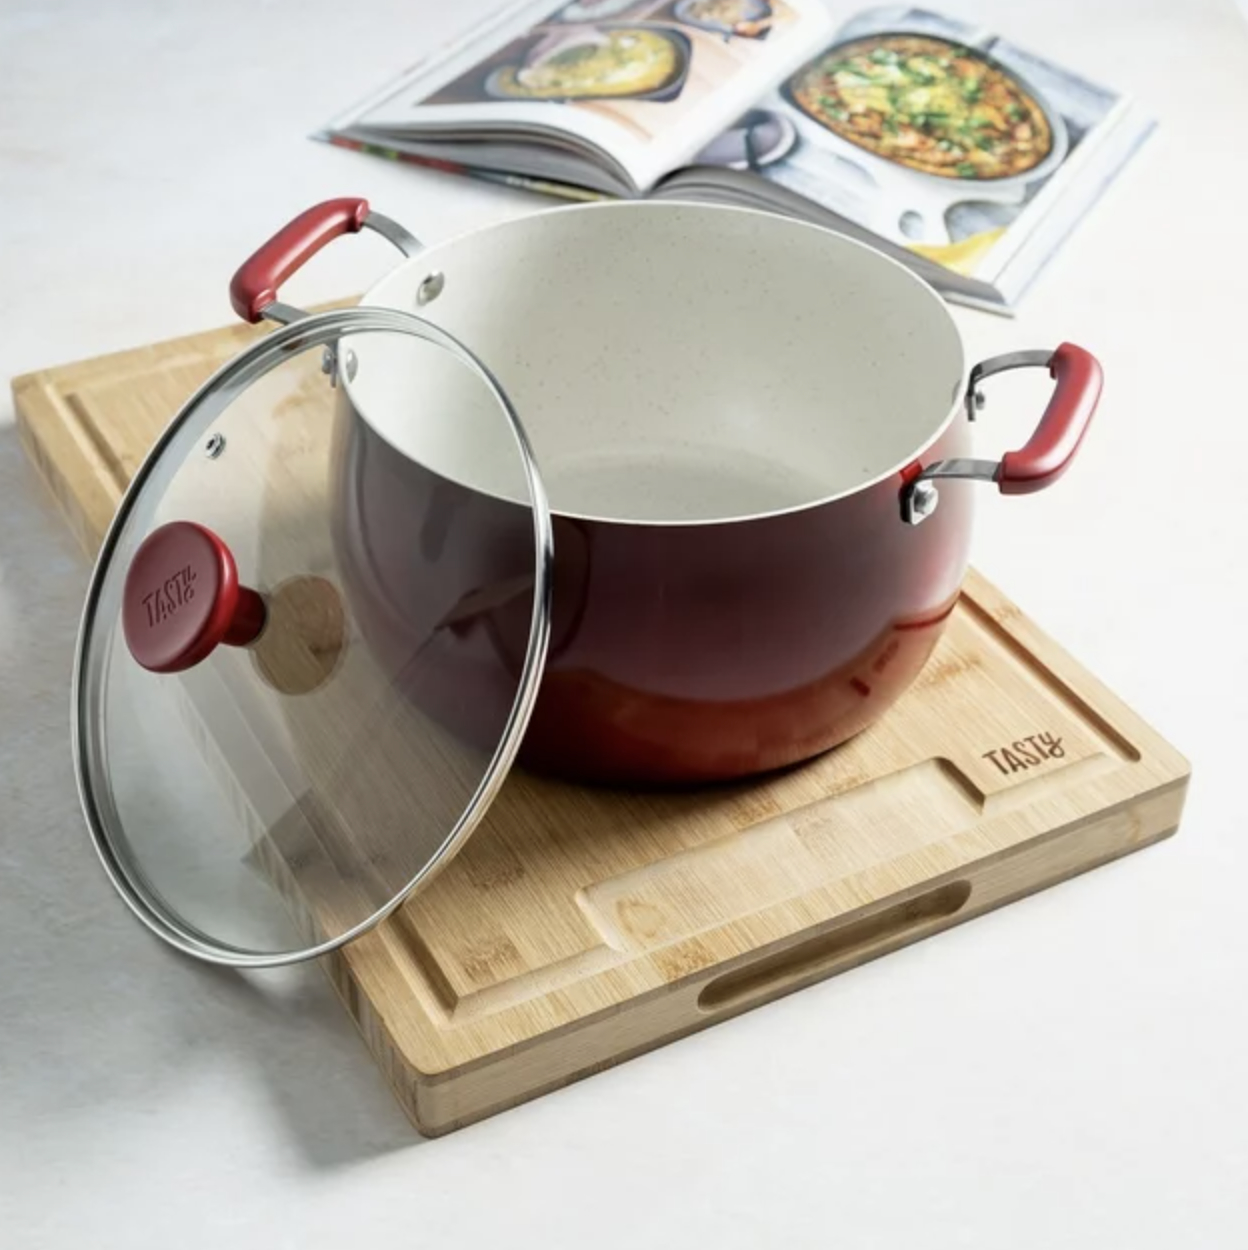 the red dutch oven on cutting board with glass lid resting against side of pot